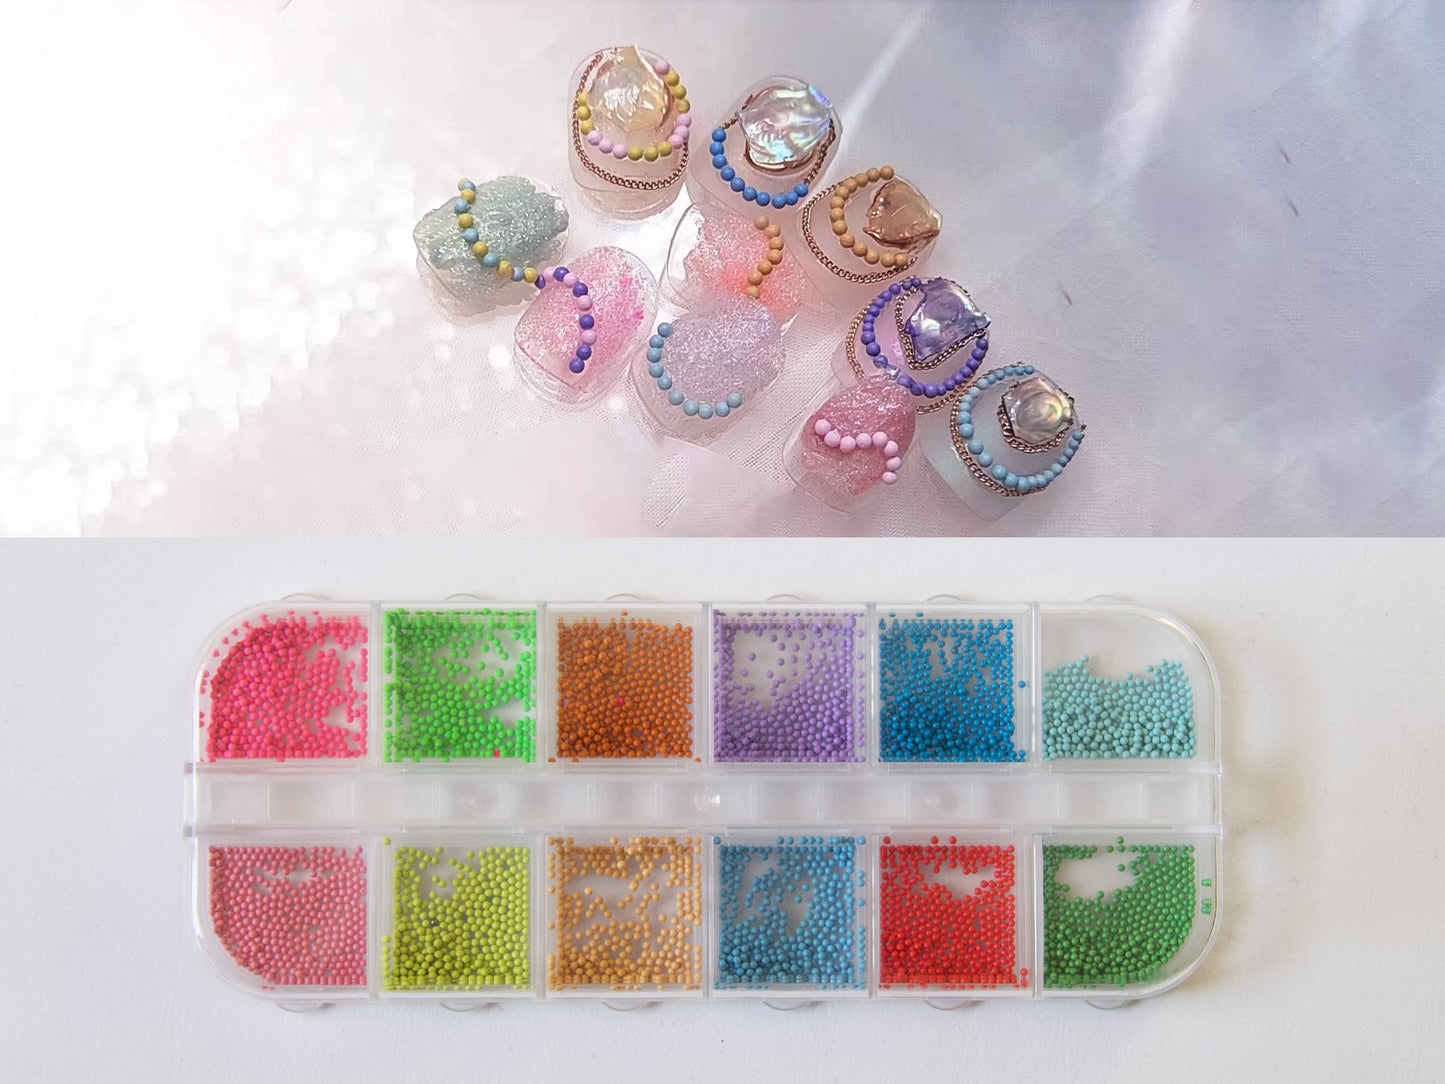 Vivid Colorful Steel Caviar Beads for Nails Art/ 1mm 12 colors Beads Decals/ Micro Beads Miniature Resin Supply Manicure Pedicure